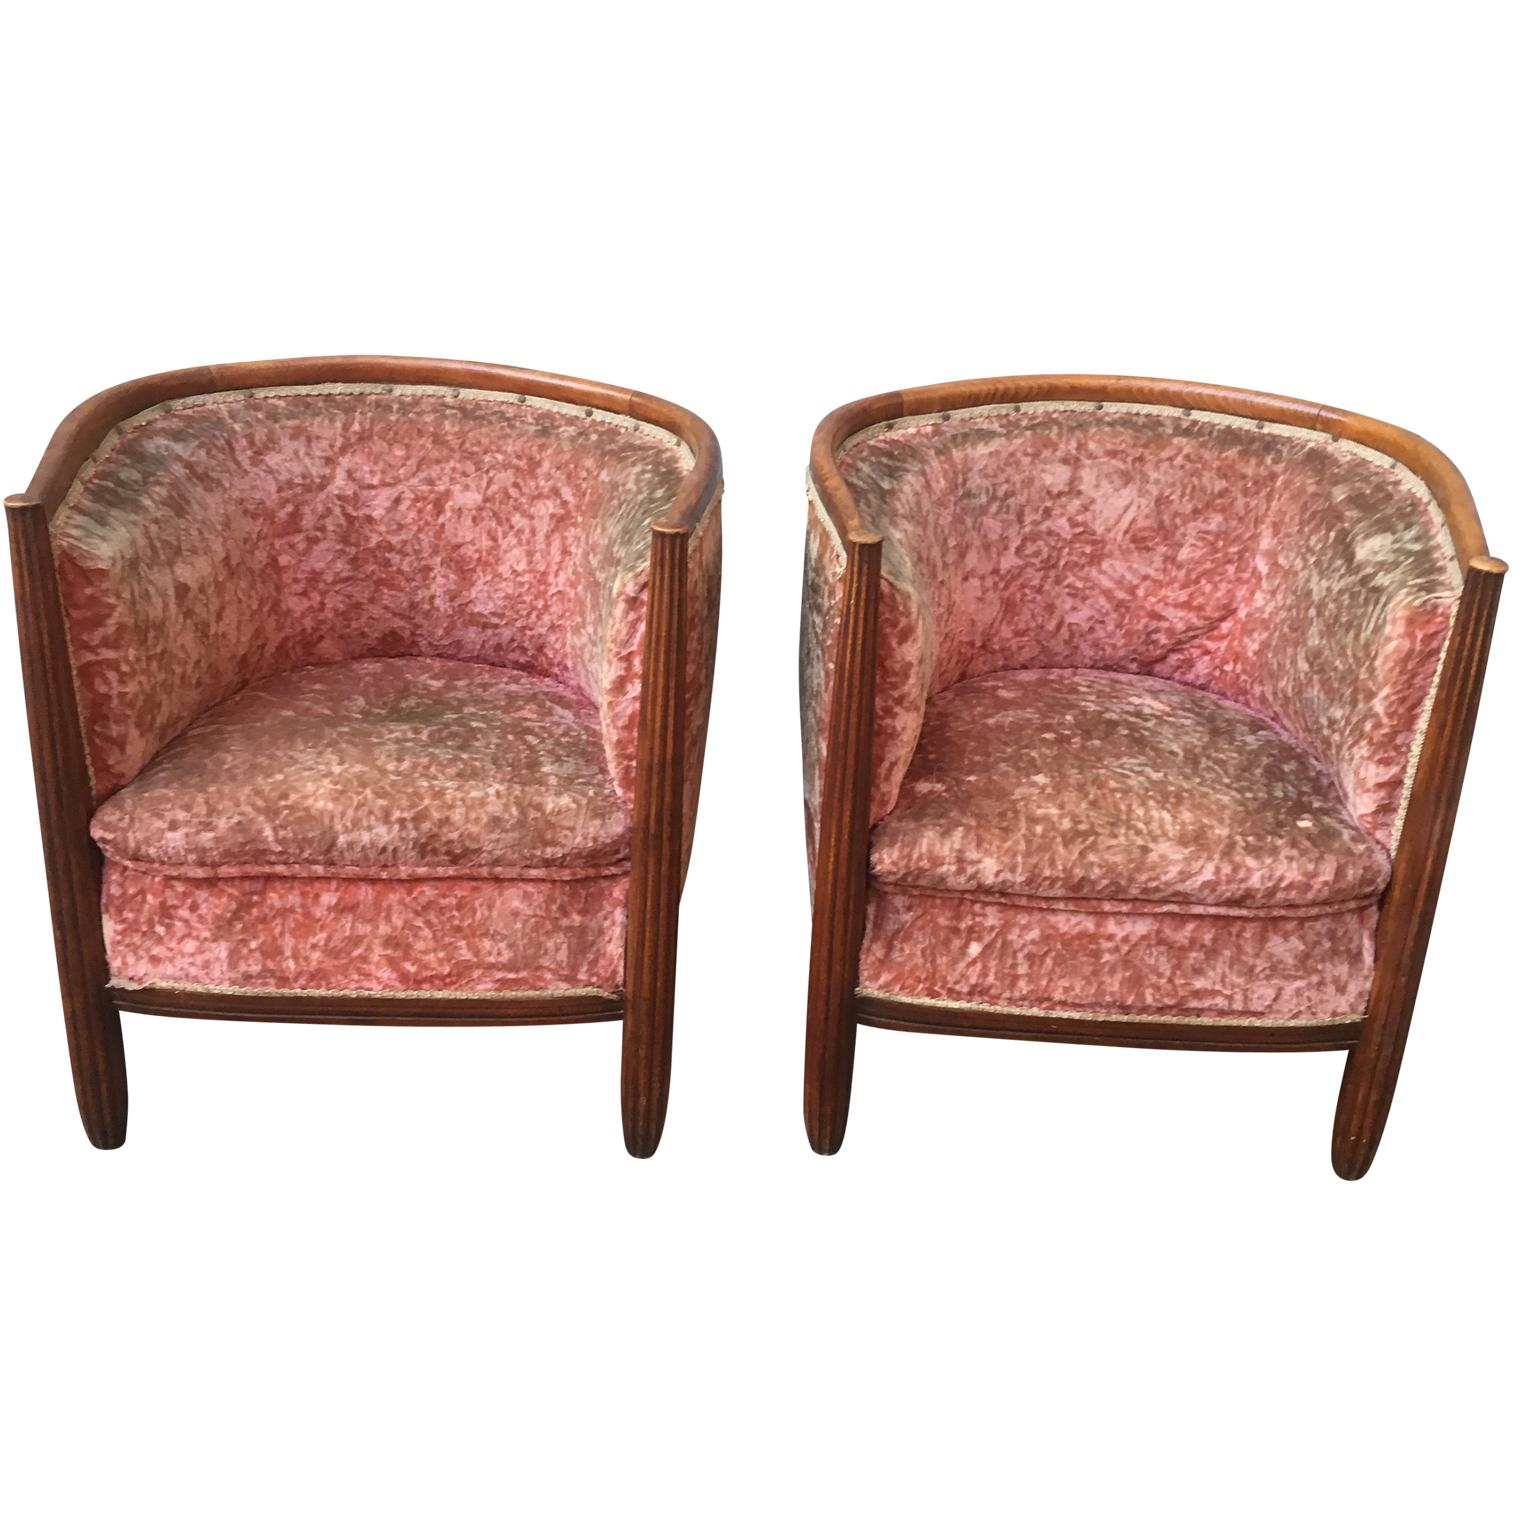 Pair of French Art Deco barrel club chairs in original pink velvet fabric.